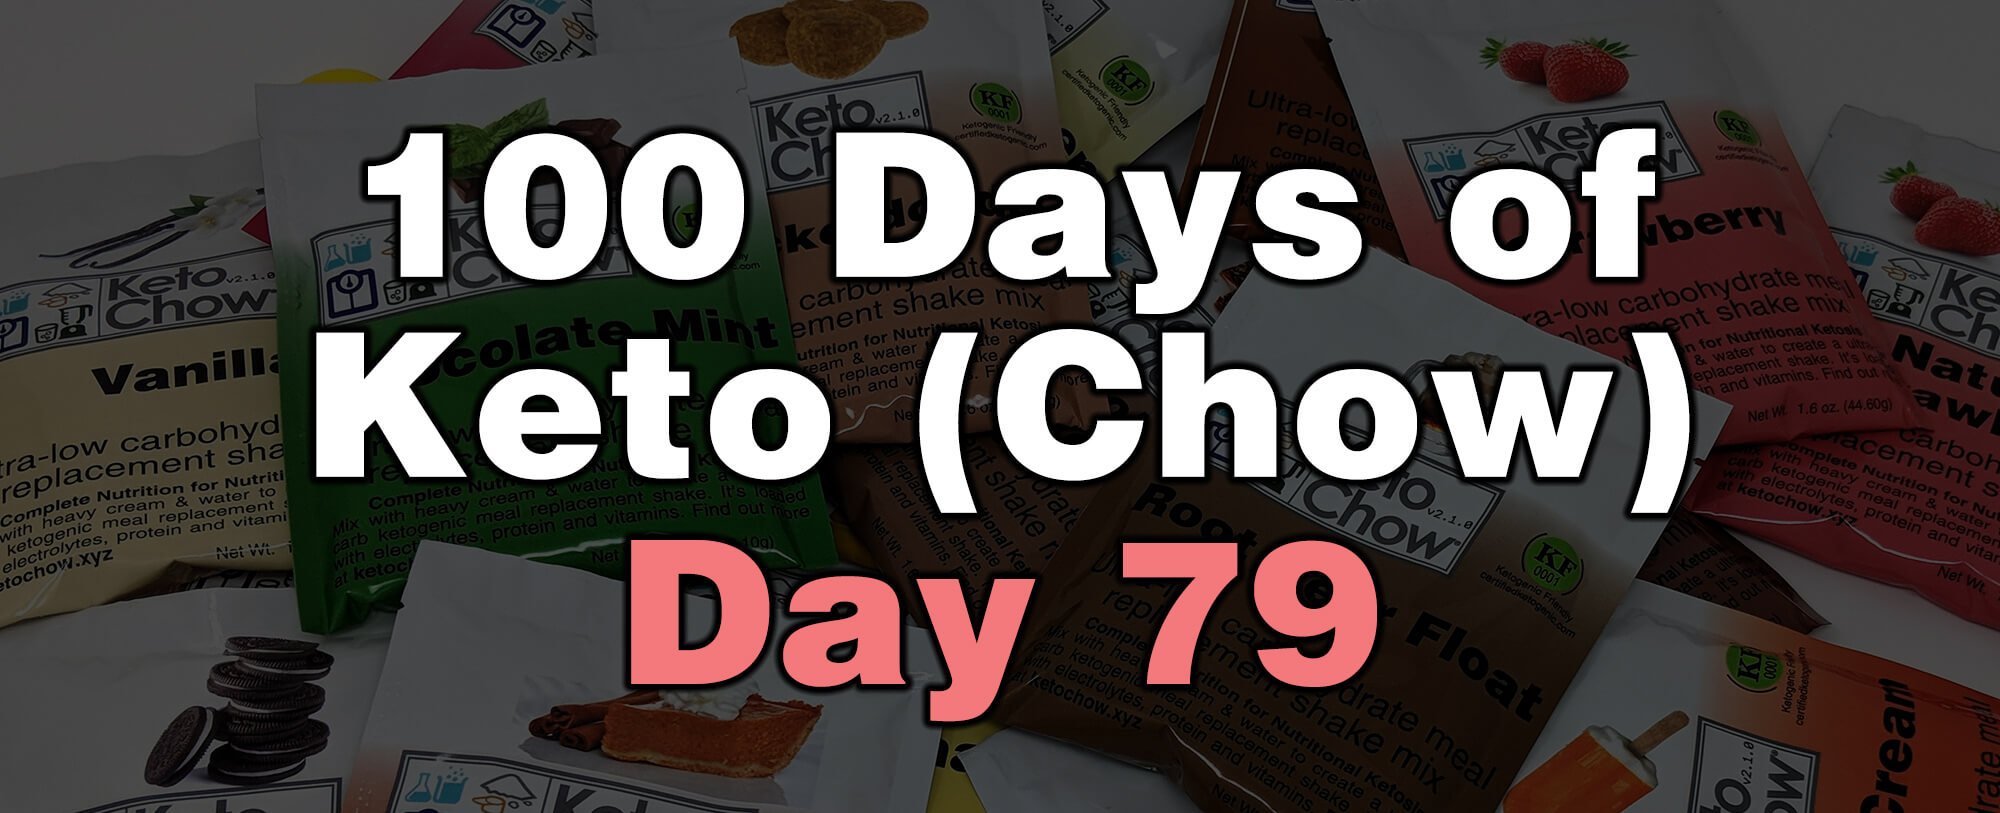 100 days of keto chow day 79